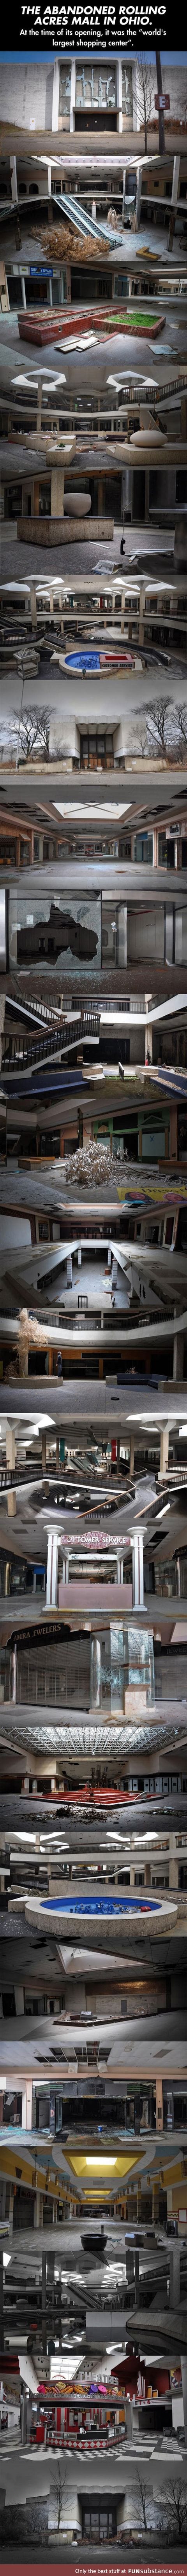 Abandoned mall in ohio